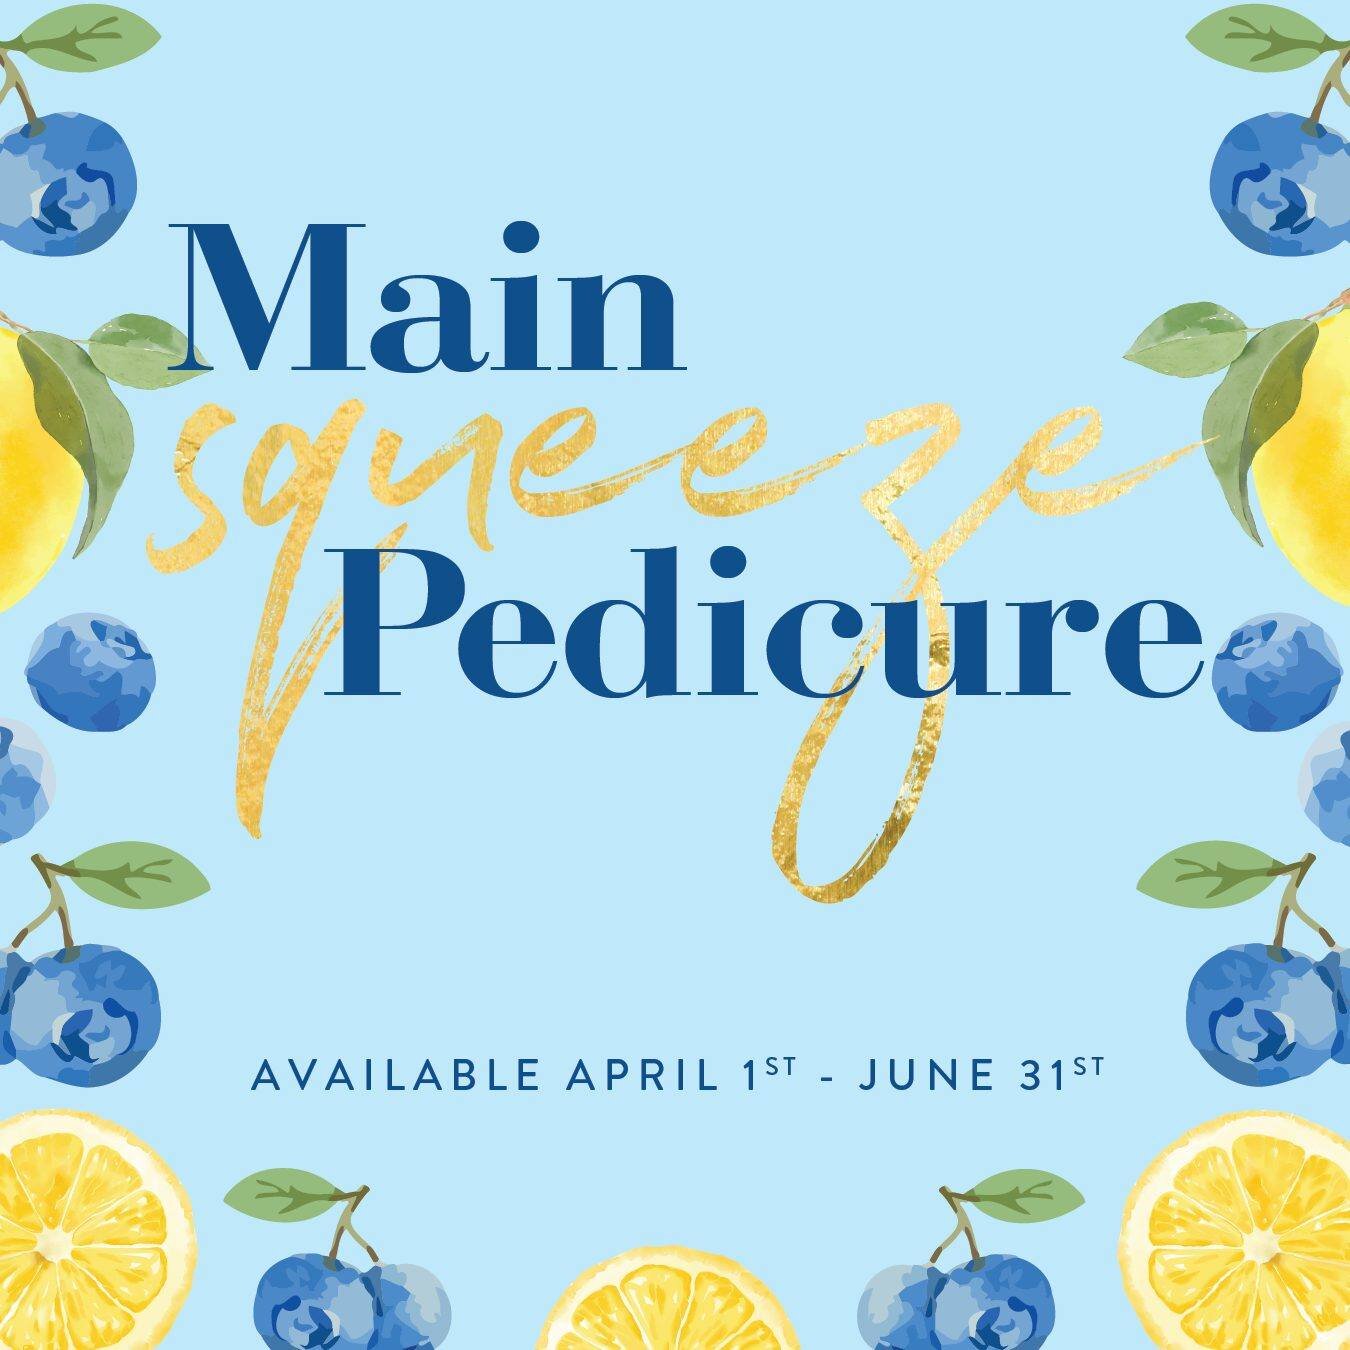 Available starting April 1st, our NEW seasonal pedi is going to be your Main Squeeze! Experience a relaxing blueberry lemon infused foot soak, scrub and mask 🫐🍋
.
.
.
Book your seasonal pedicure today before it's gone!
.
#delmontespa #skinhealth #s